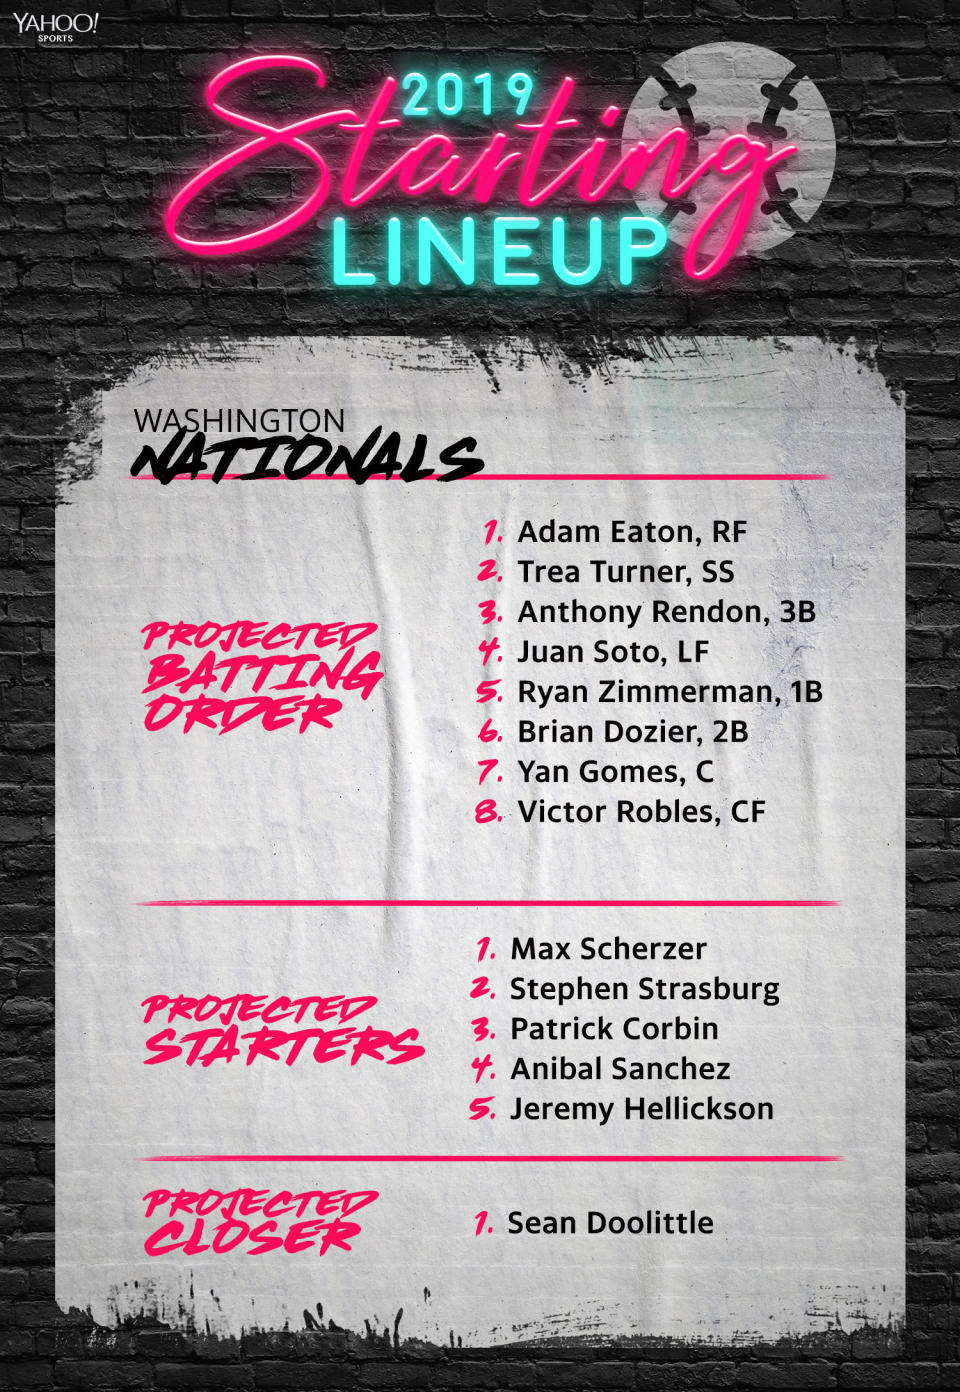 The projected line up for the 2019 Washington Nationals. (Yahoo Sports)